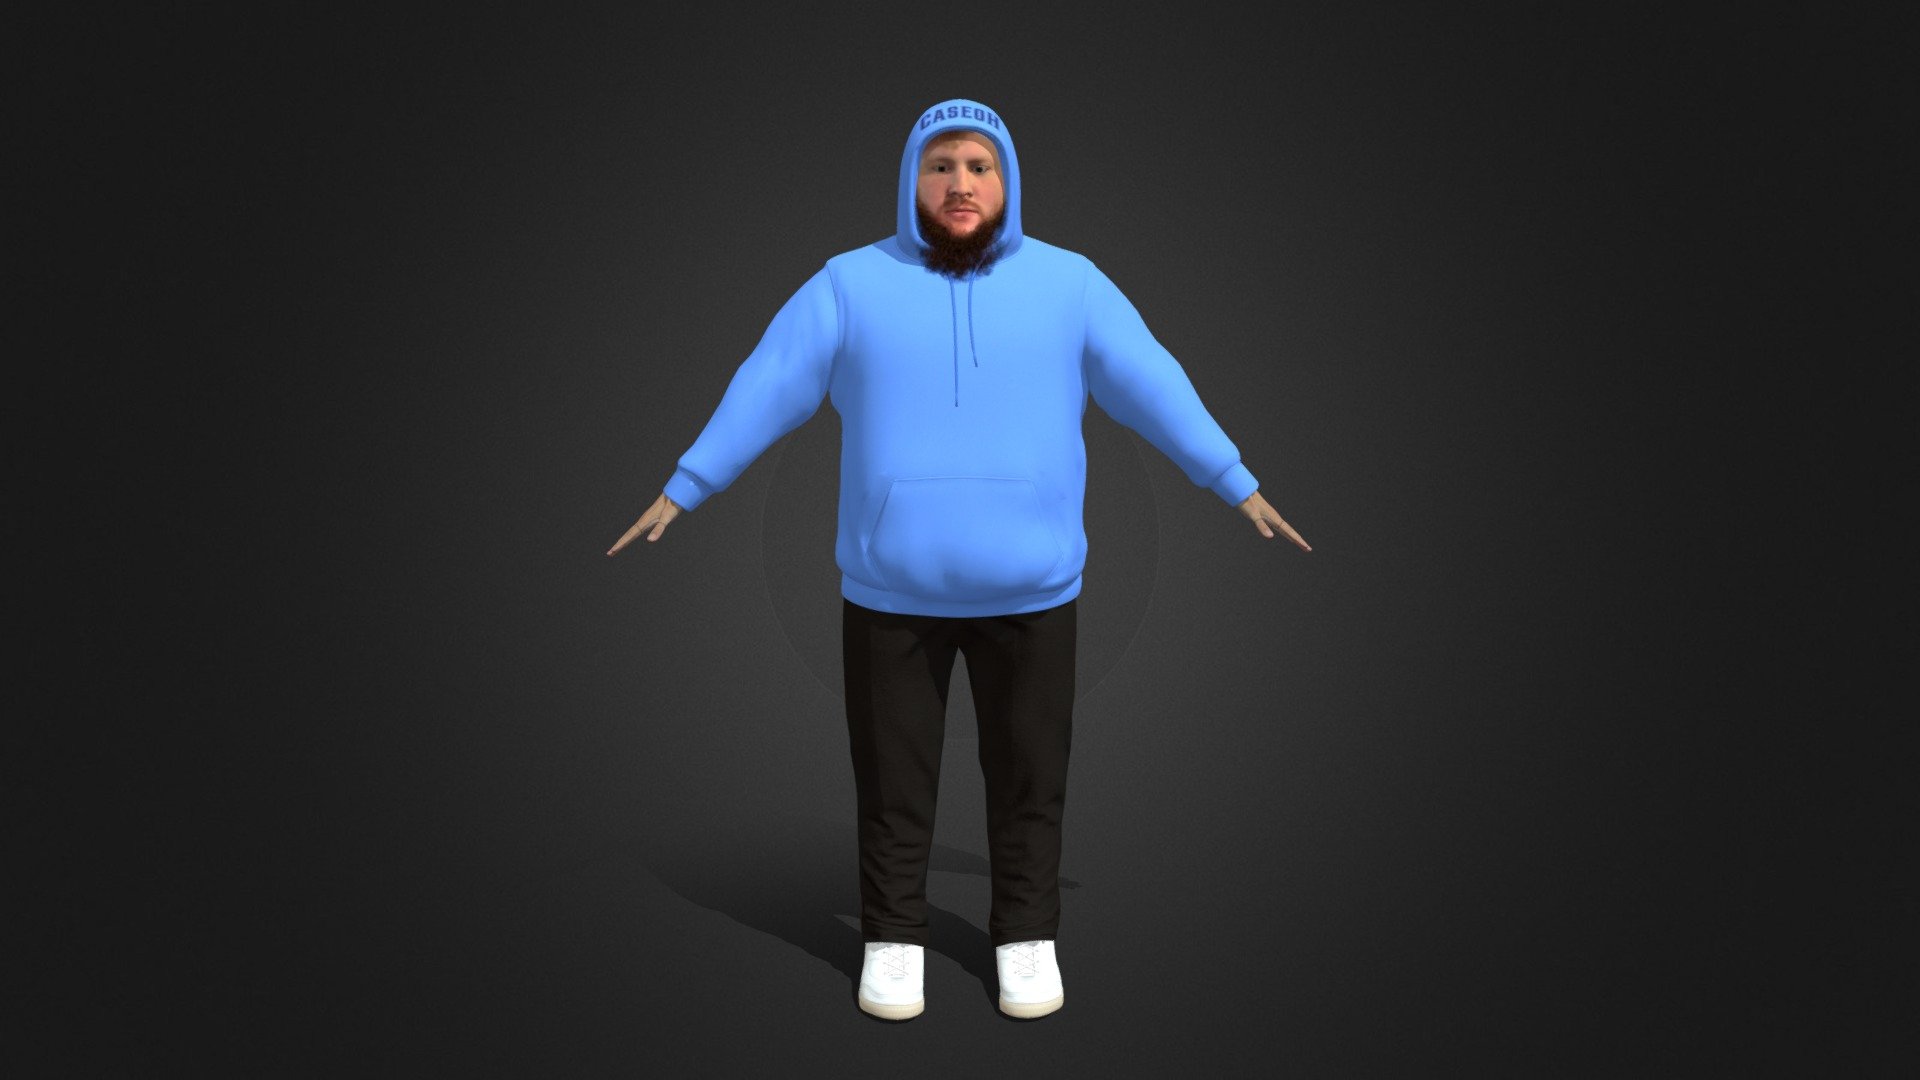 3D model of Caseoh

We can create 3D models of all famous artists or custom characters. You can send me a message on Instagram if you’re interested –&gt; https://www.instagram.com/valone.future/ - Caseoh - 3D model by ValOne 3d model